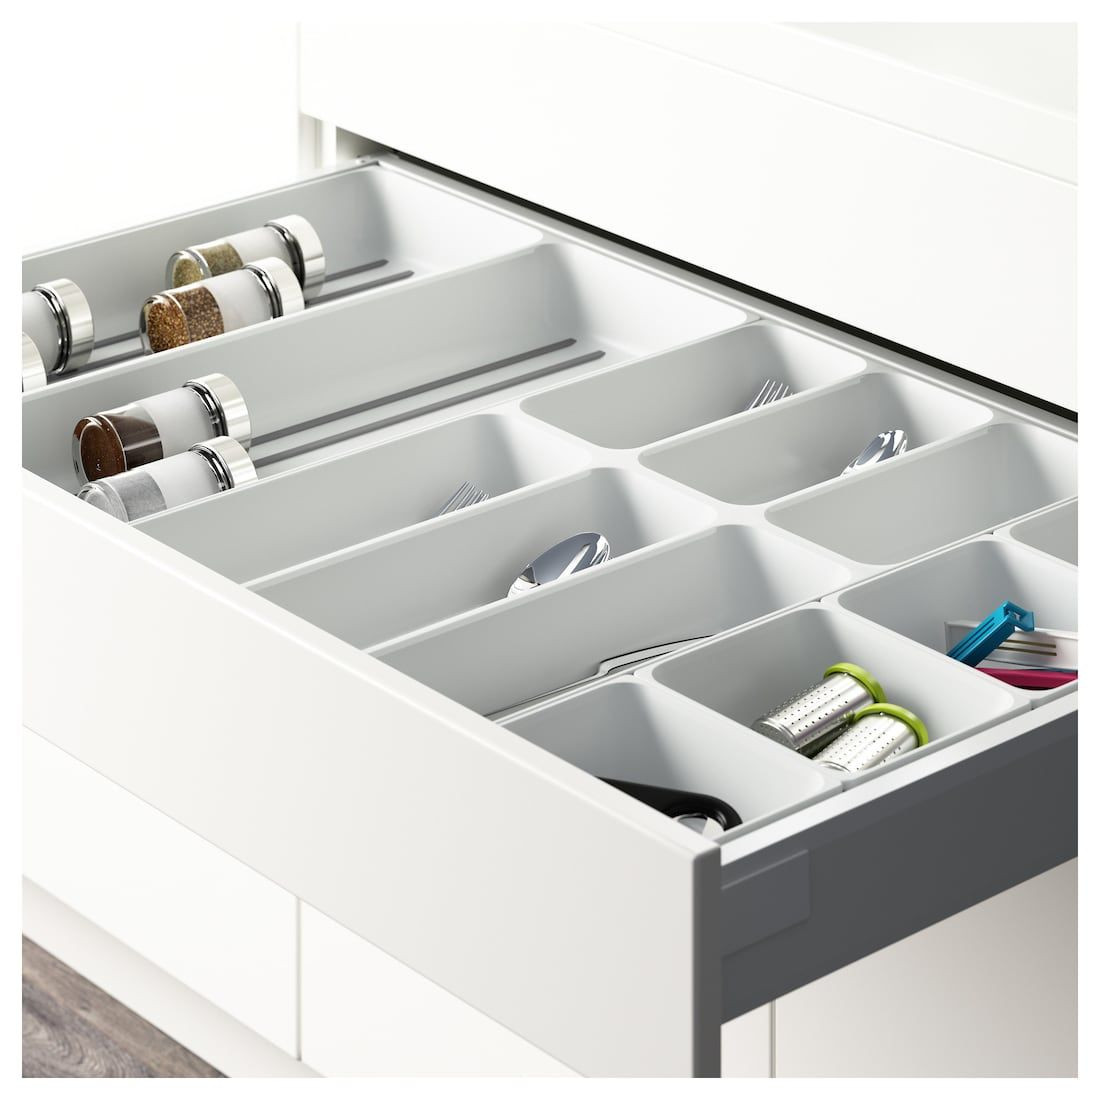 Ikea Kitchen Drawer Organizers
 VARIERA Flatware tray white 12x20 " in 2020 With images